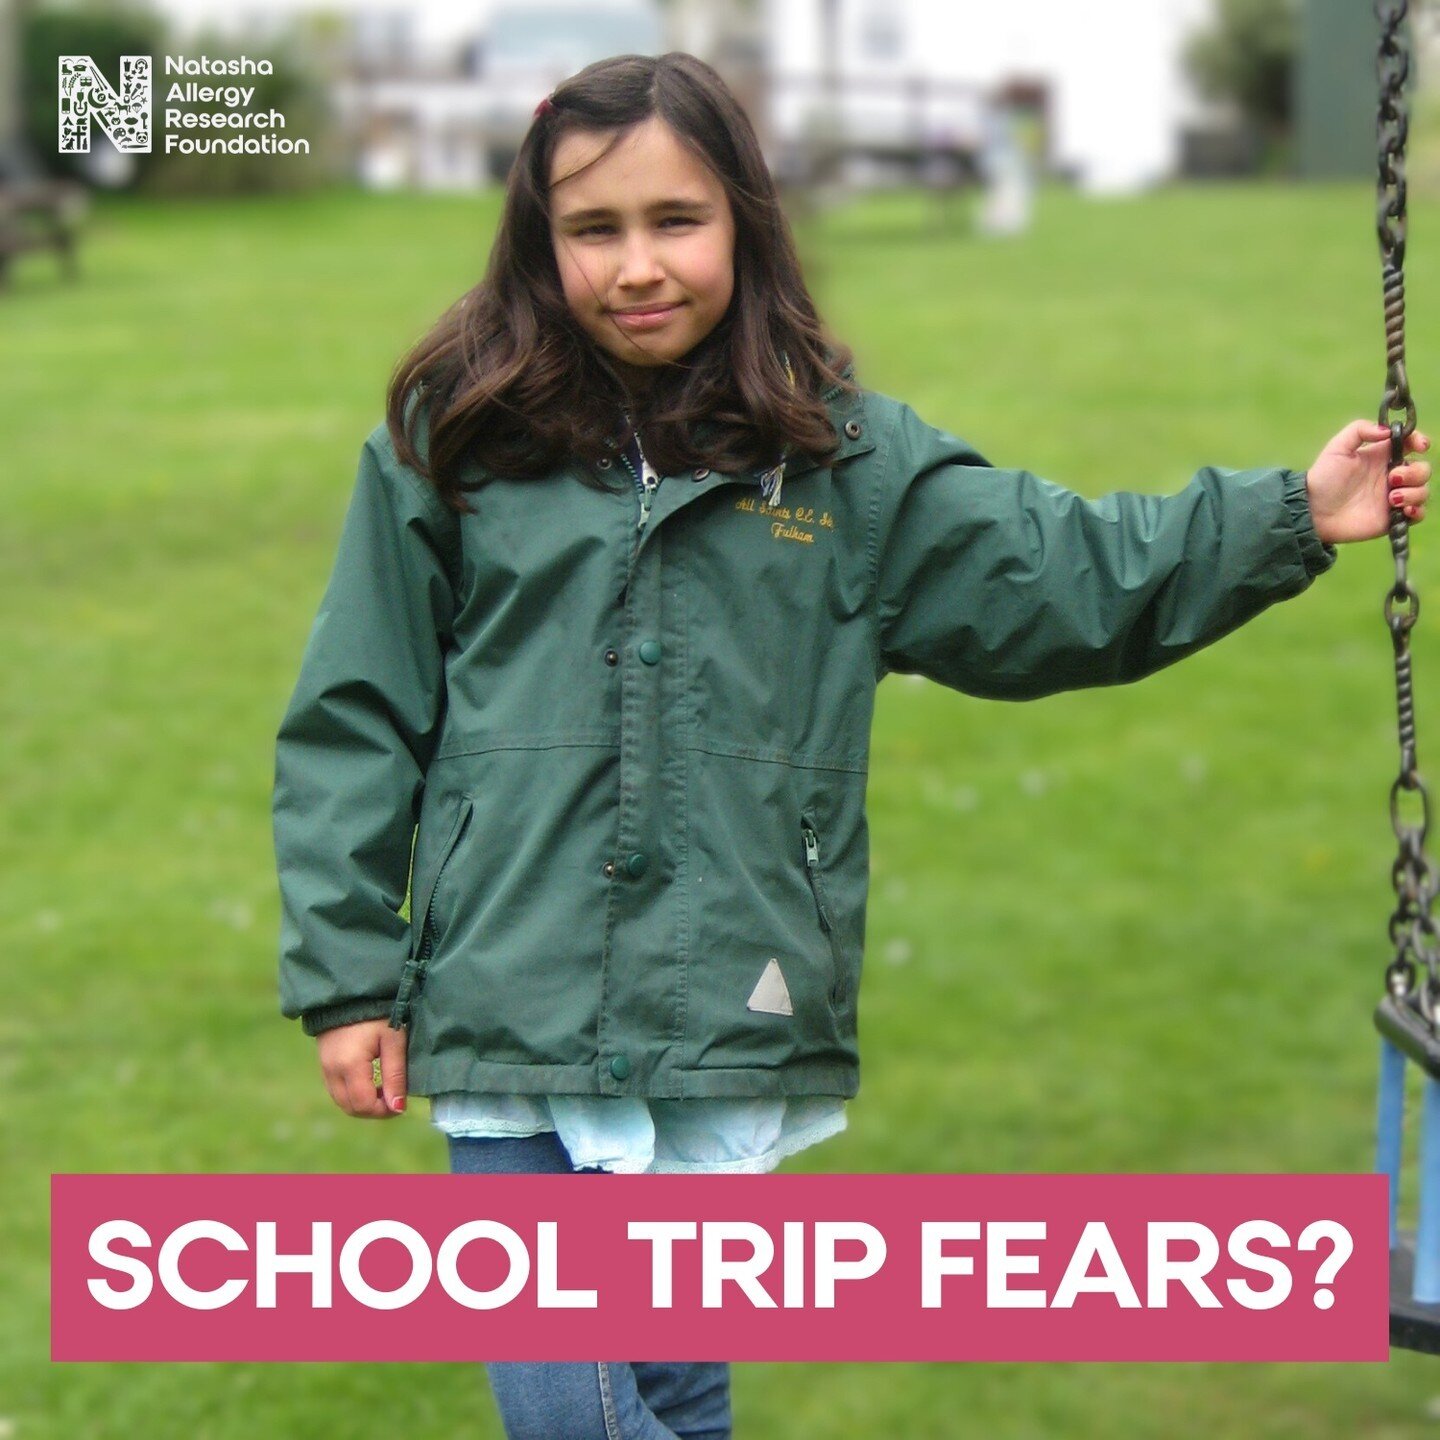 School day-trips with food allergies can cause great anxiety for parents of allergic children, so the prospect of a residential trip with a sleepover for one or more nights (very often 2 - 4) can feel utterly terrifying.

Natasha was 10 years old she